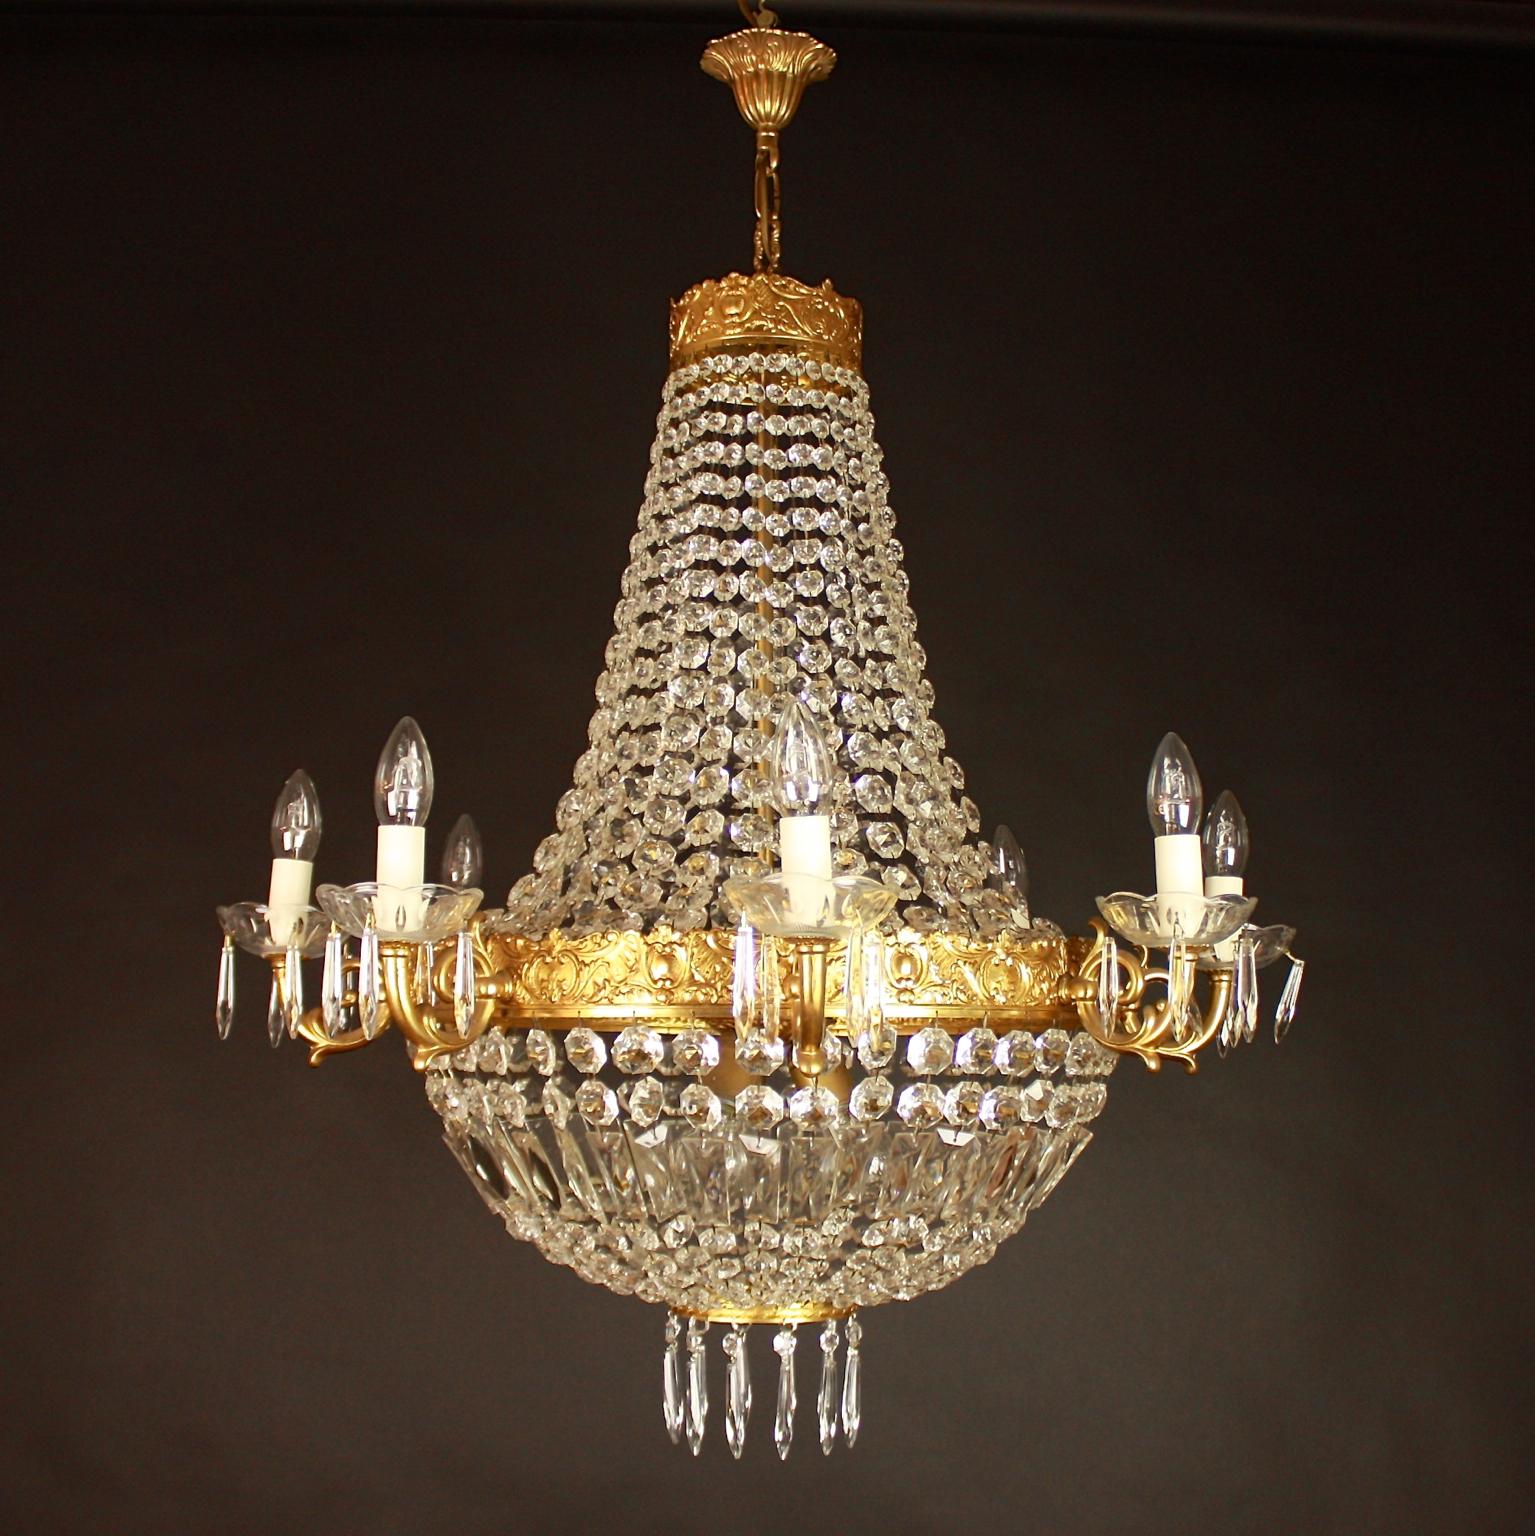 A pair of Empire style chandeliers, each with a bronze cast corona hang with suspended chains of graduated octagonal flatback beads, with a central gilt bronze tier depicting acanthus leaves, scrolls and rocaille ornaments and supporting eight